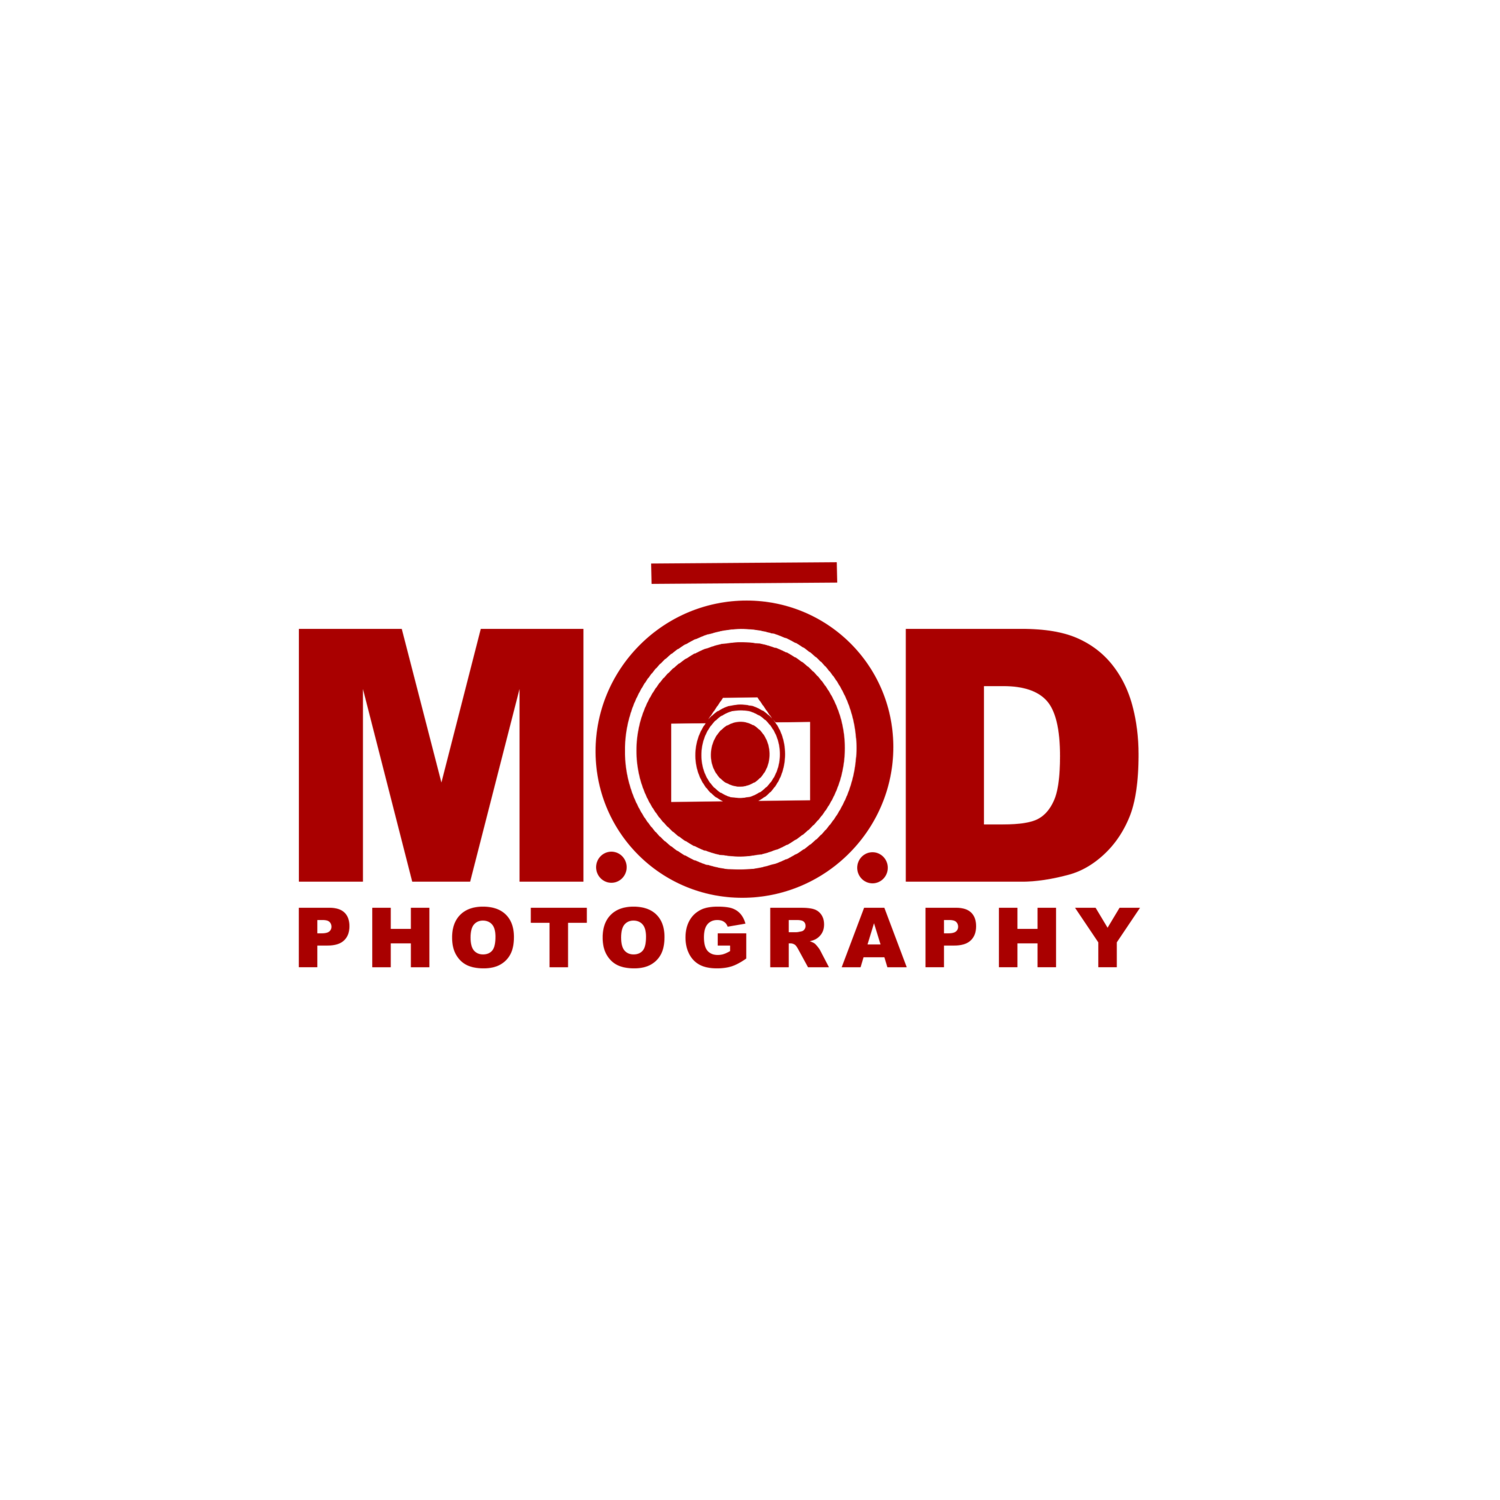 M.O.D. PHOTOGRAPHY